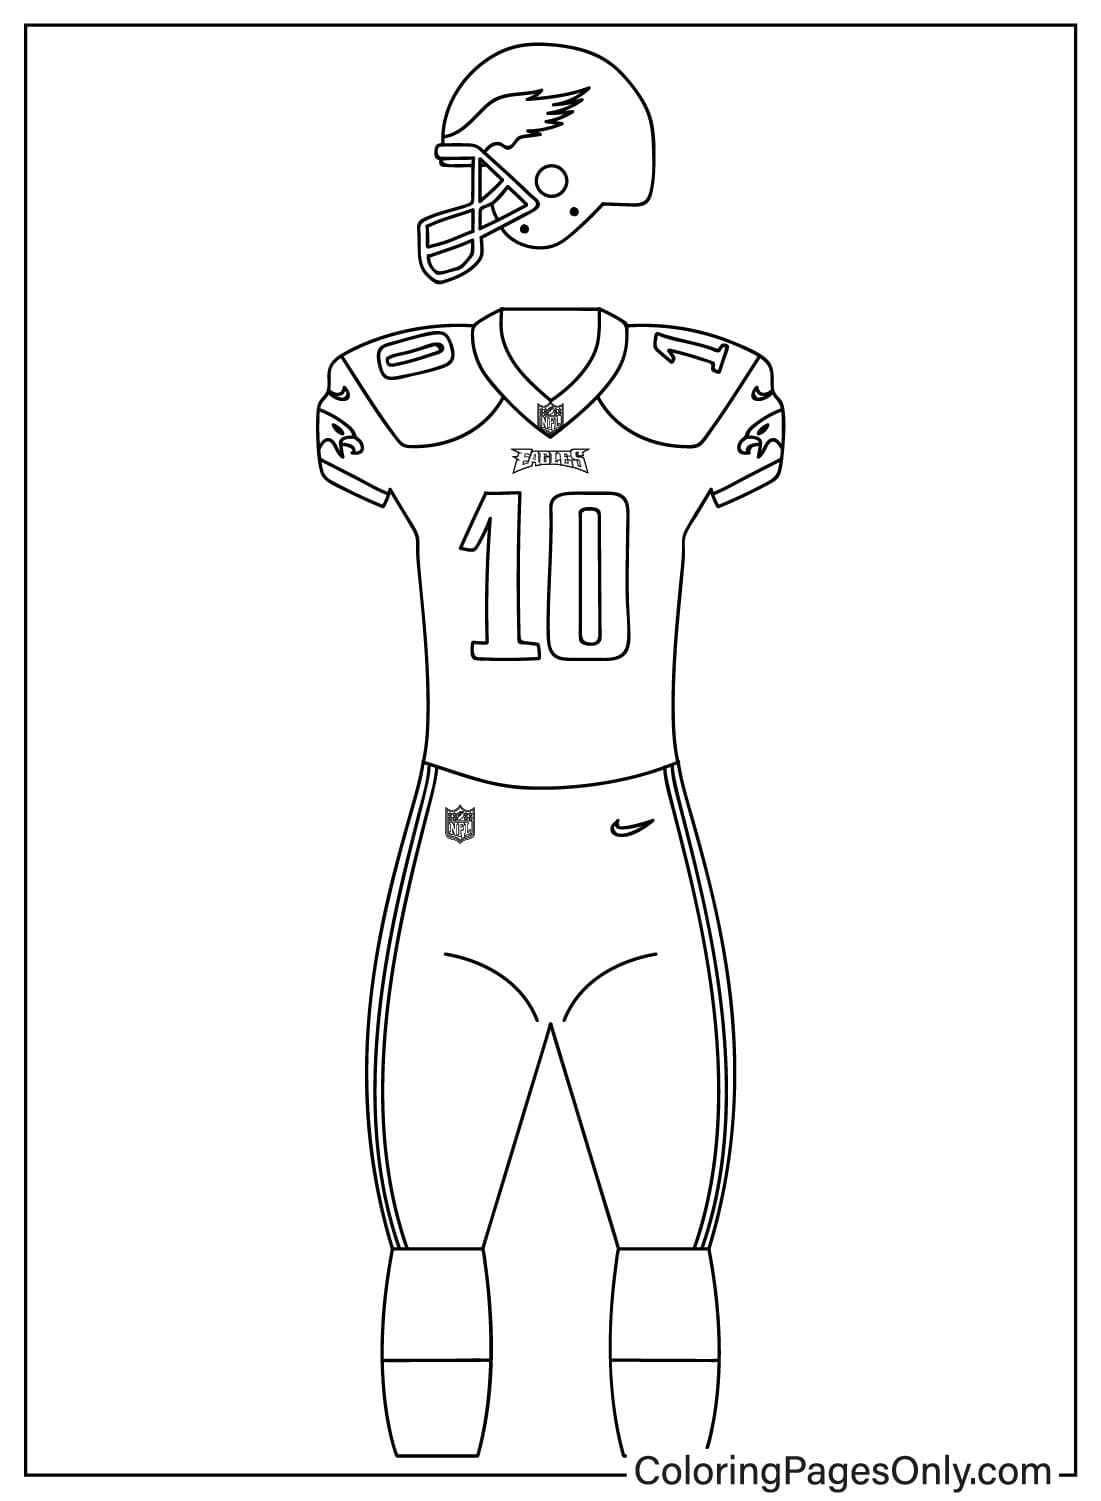 Uniform Philadelphia Eagles Coloring Page - Free Printable Coloring Pages